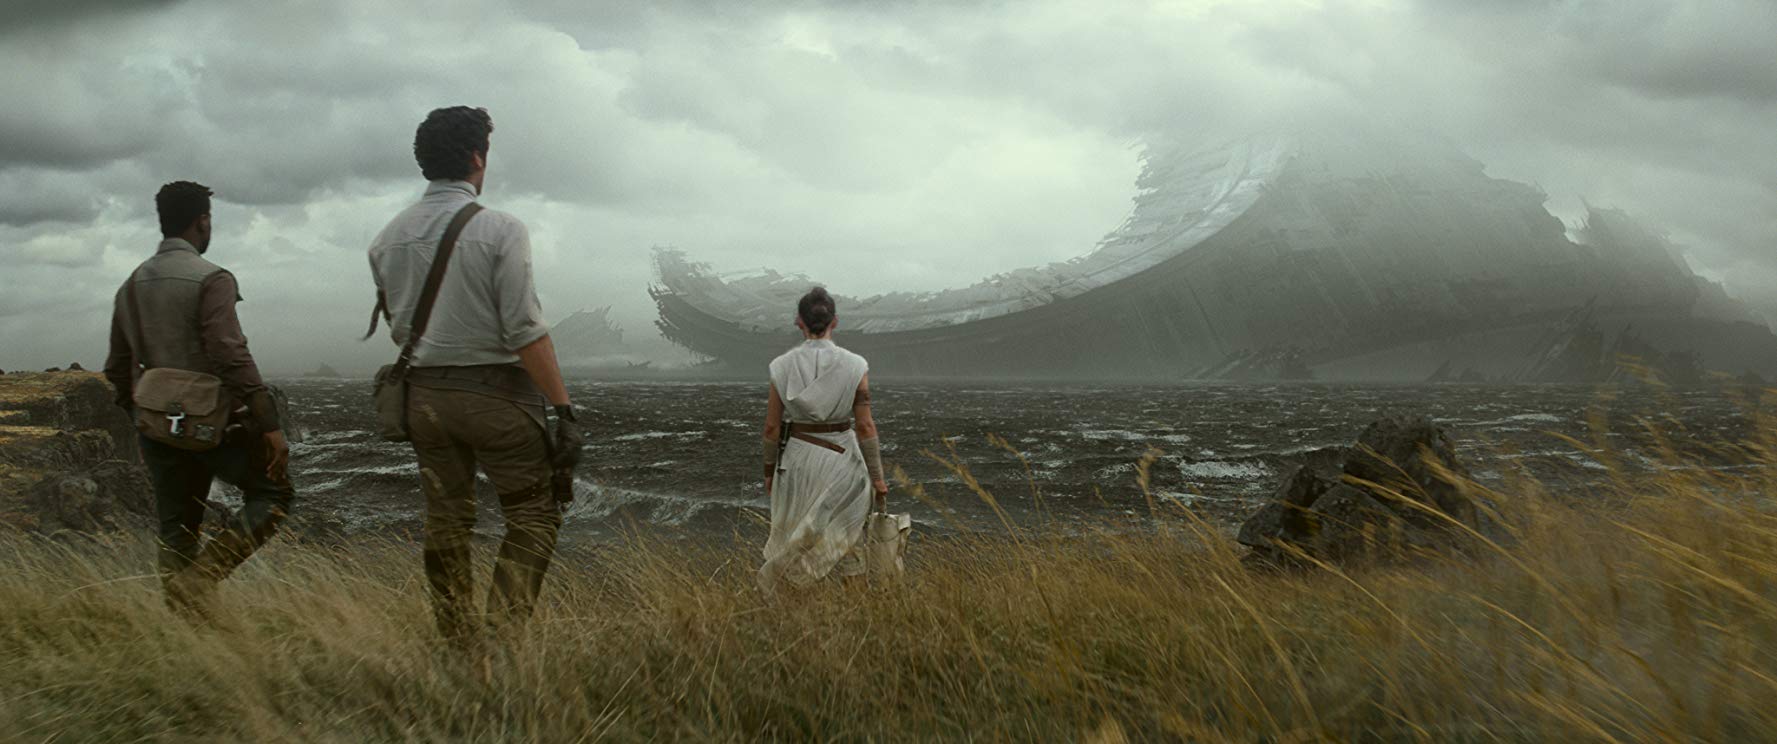 Star Wars- The Rise of Skywalker panoramic